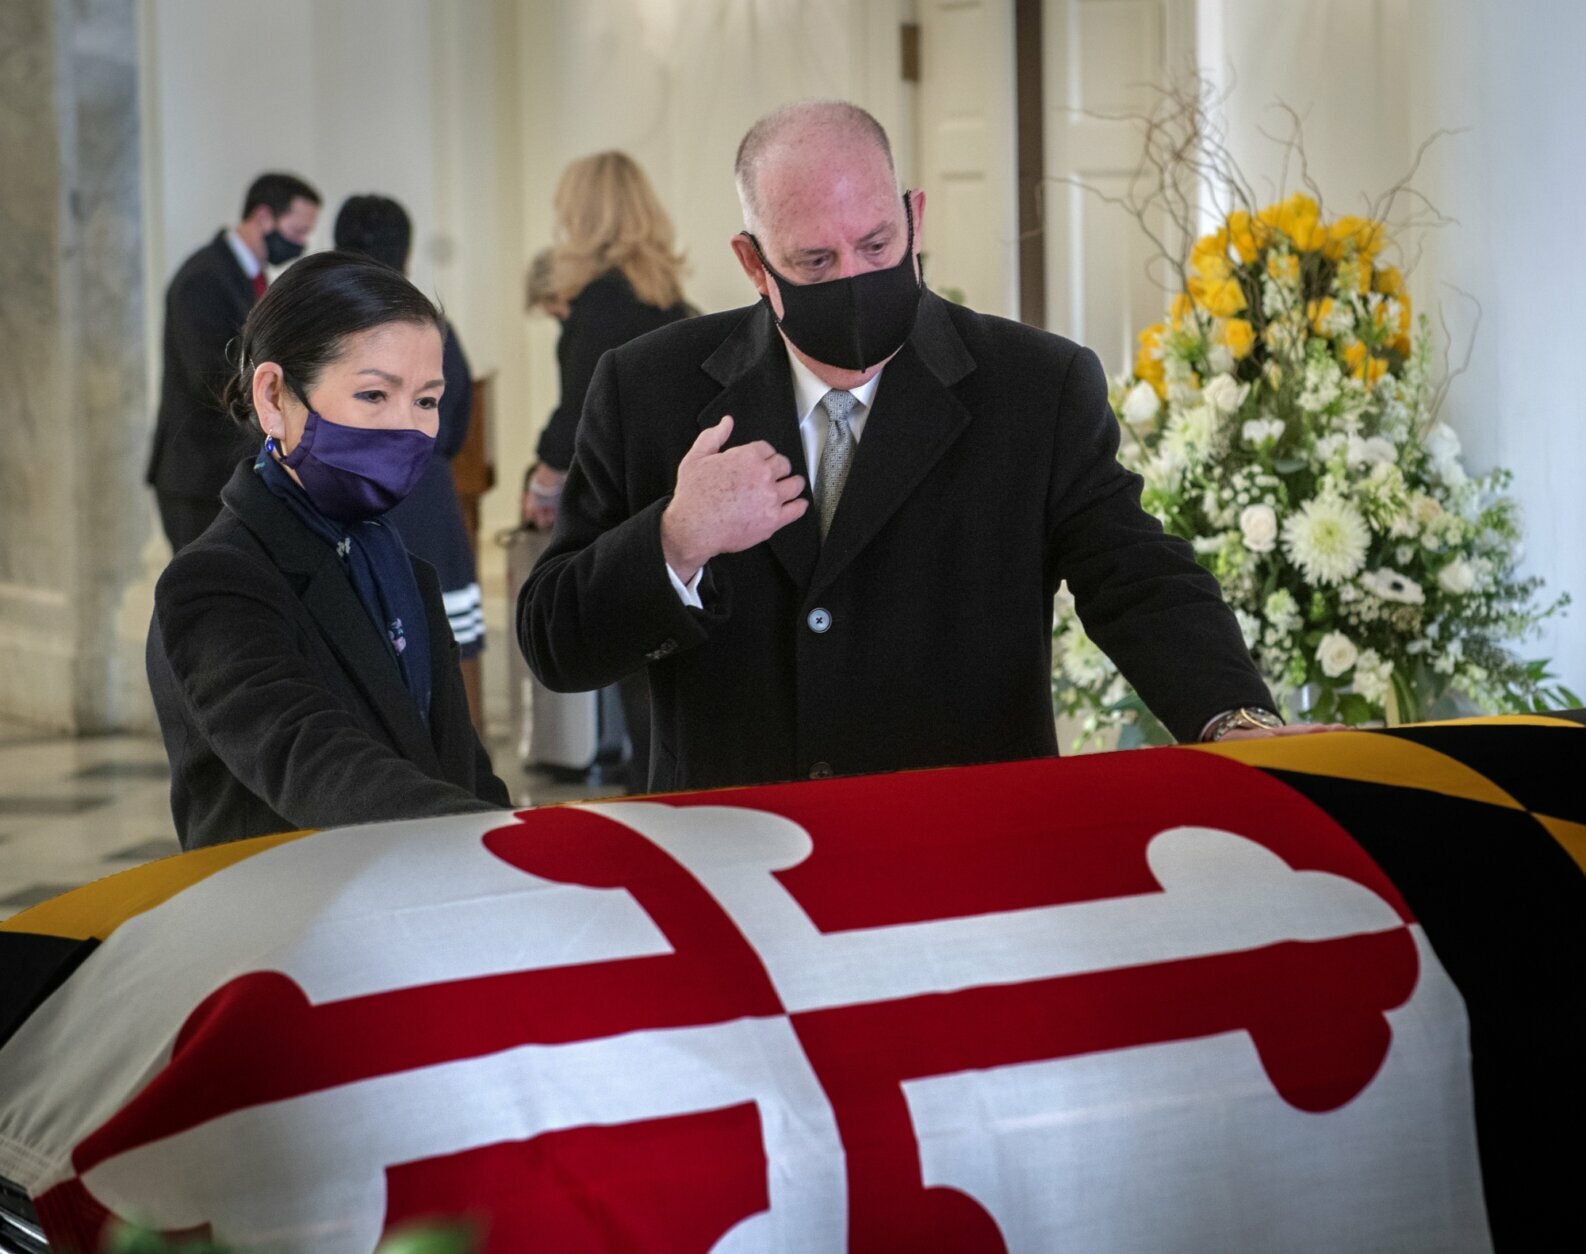 Gov. Larry Hogan, center, with wife Yumi, left, pays respects to the late Senate President Emeritus Thomas V. Mike Miller, Jr., under the dome of the statehouse at the Maryland Statehouse in Annapolis, Md., on Friday, Jan. 22, 2021.  Miller was a state legislator for 50 years. A Democrat, he served as president of the Maryland Senate for 33 years. He announced he was stepping down from the post in 2019, but he remained a senator until December. (Bill O'Leary/The Washington Post via AP, Pool)